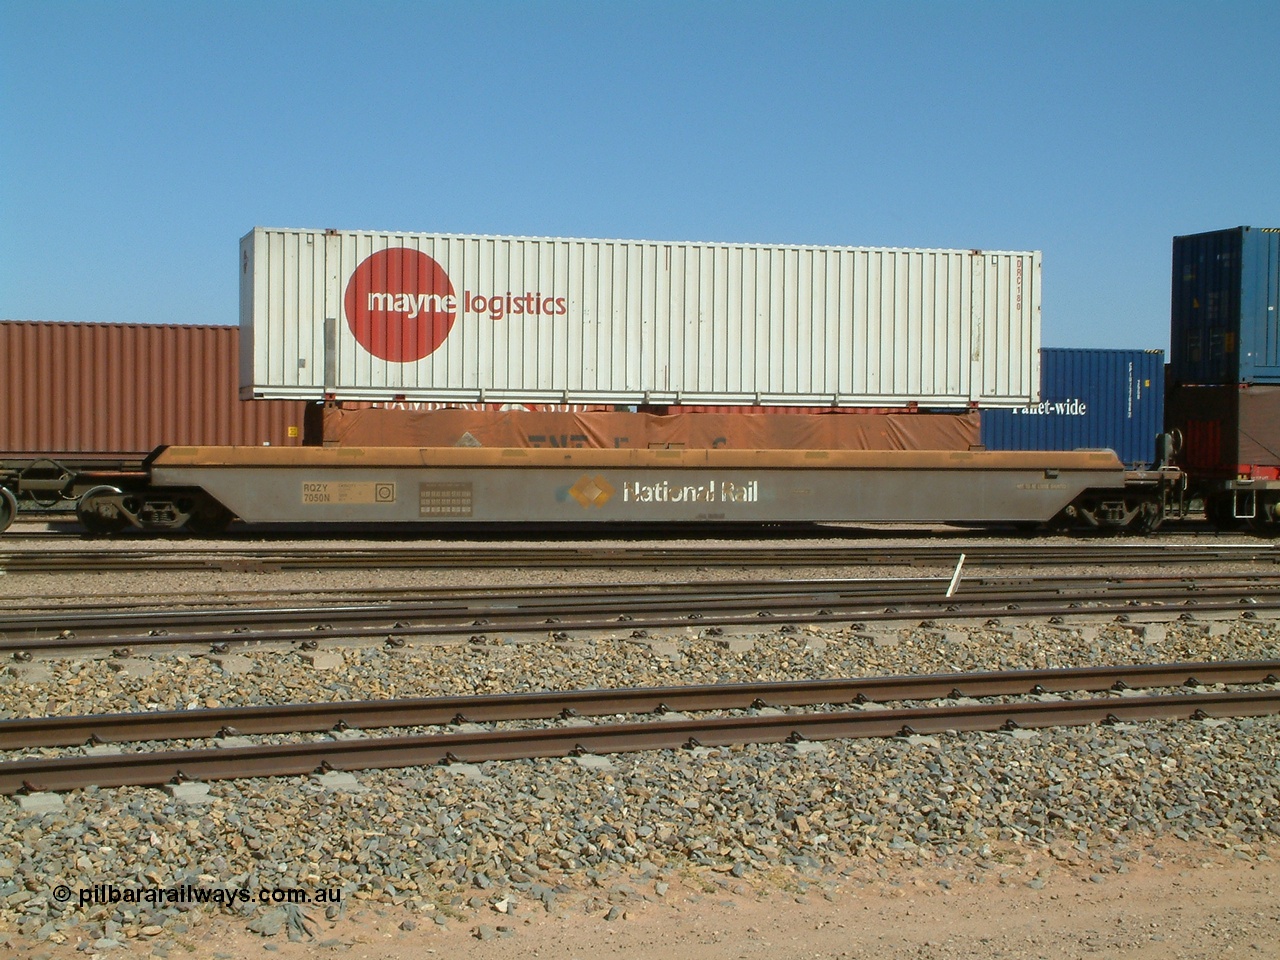 030404 104443
Port Augusta, Spencer Junction yard, RQZY type five unit bar coupled well container waggon RQZY 7050 built as one of a batch of thirty two by Goninan NSW for National Rail, with a Mayne Logistics 48' box DRC 180 on top of a TNT tarped 40' half height unit. 4th April, 2003.
Keywords: RQZY-type;RQZY7050;Goninan-NSW;1995-96/32-16;